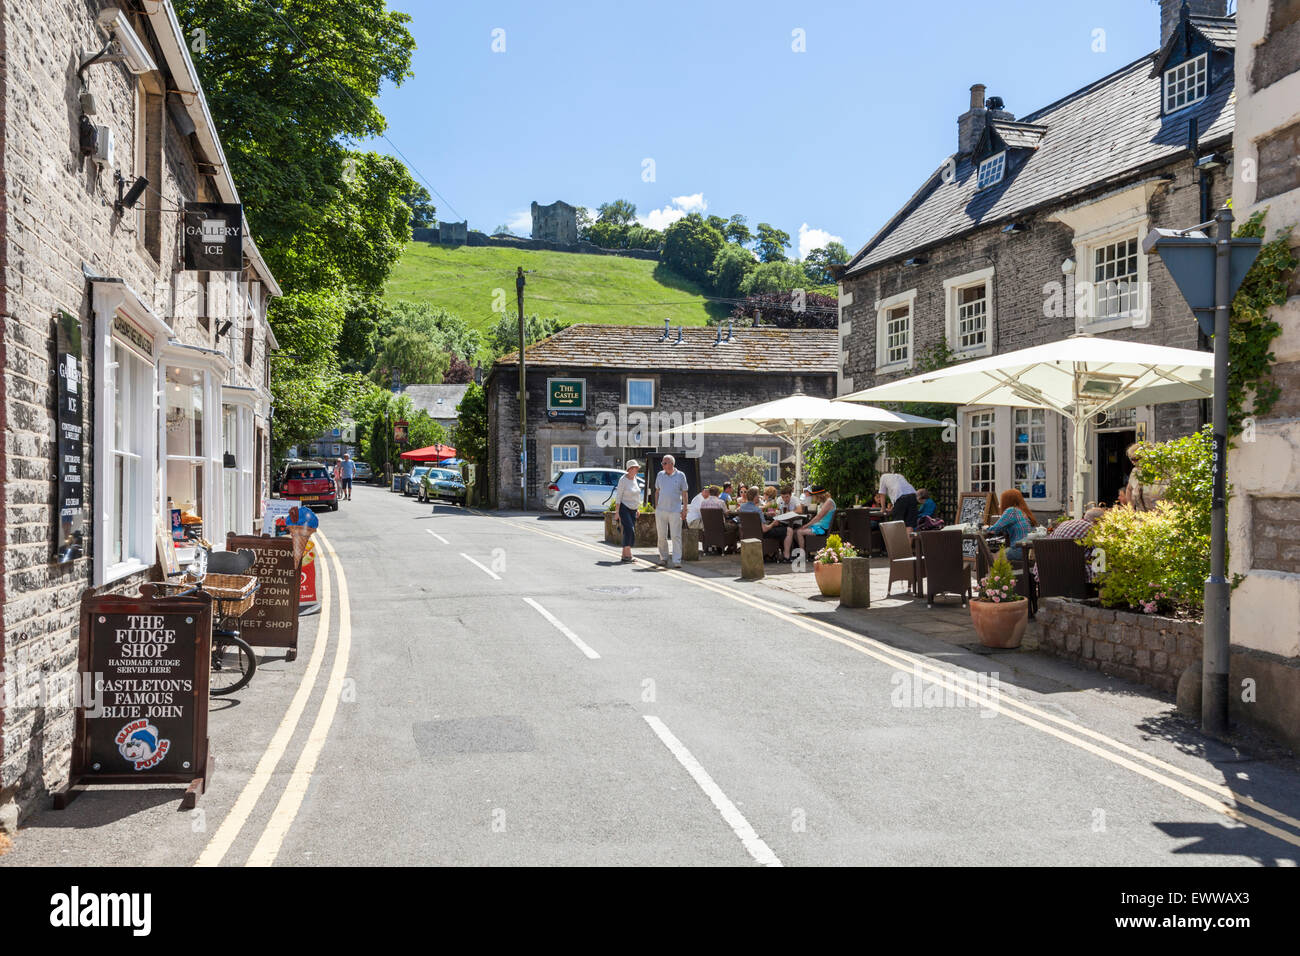 Shops and a pub in Castleton with Peveril Castle on the hill overlooking the village in Summer, Derbyshire, Peak District National Park, England, UK Stock Photo